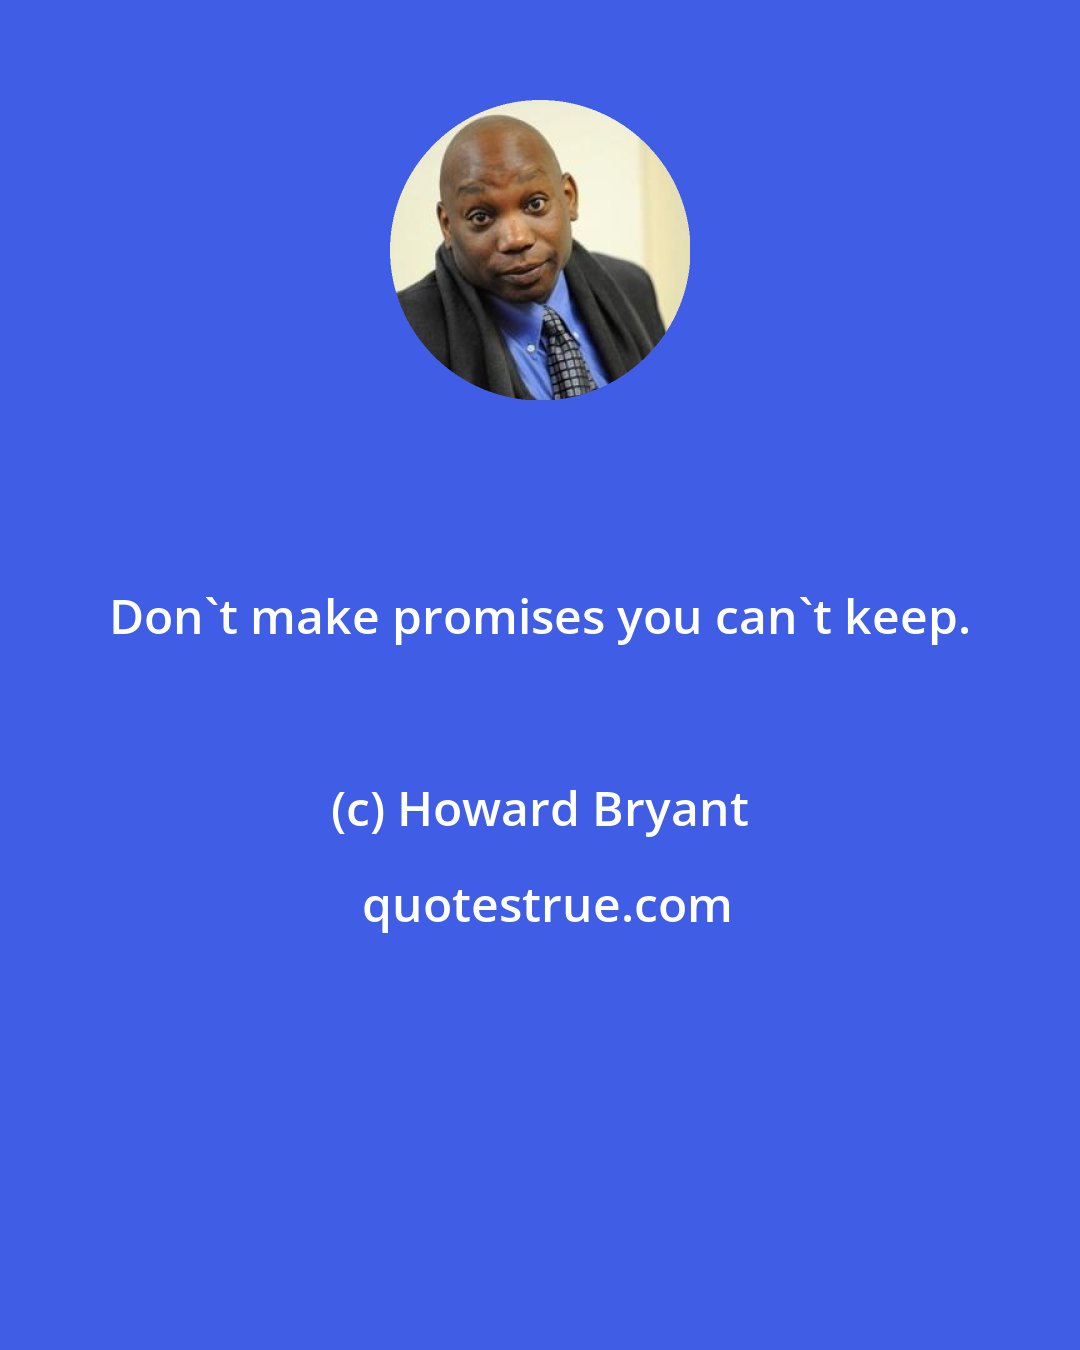 Howard Bryant: Don't make promises you can't keep.